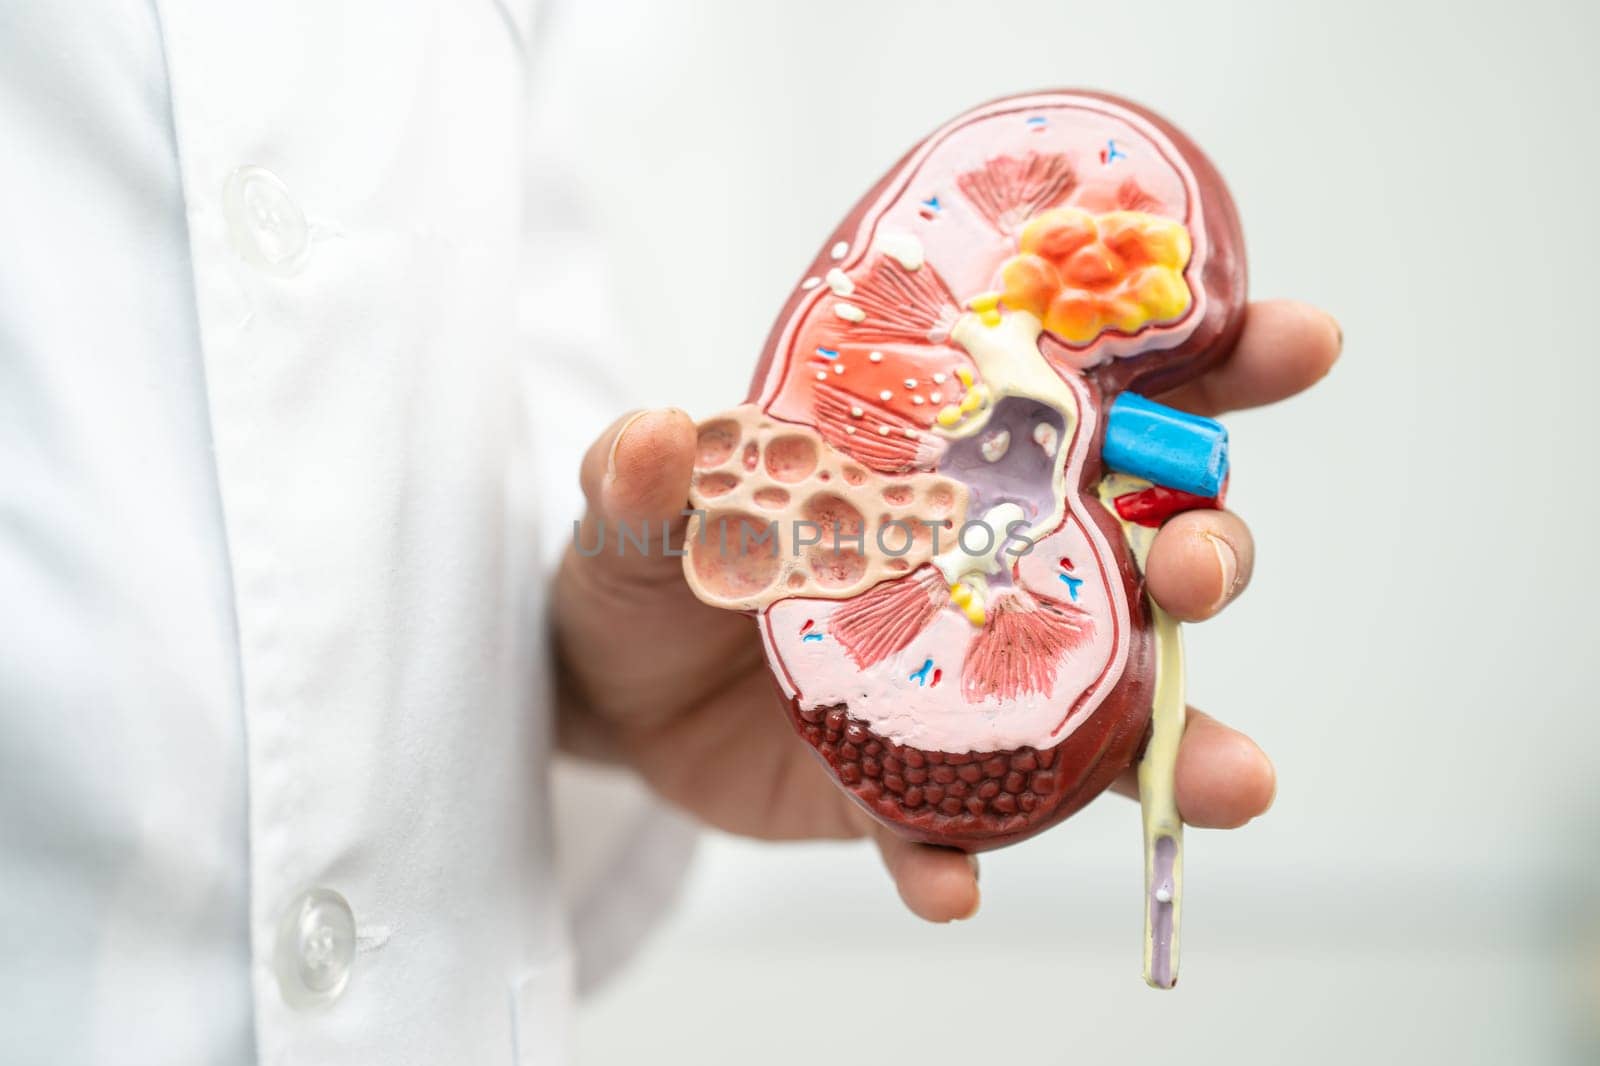 Kidney disease, Chronic kidney disease ckd, Doctor hold model to study and treat in hospital.